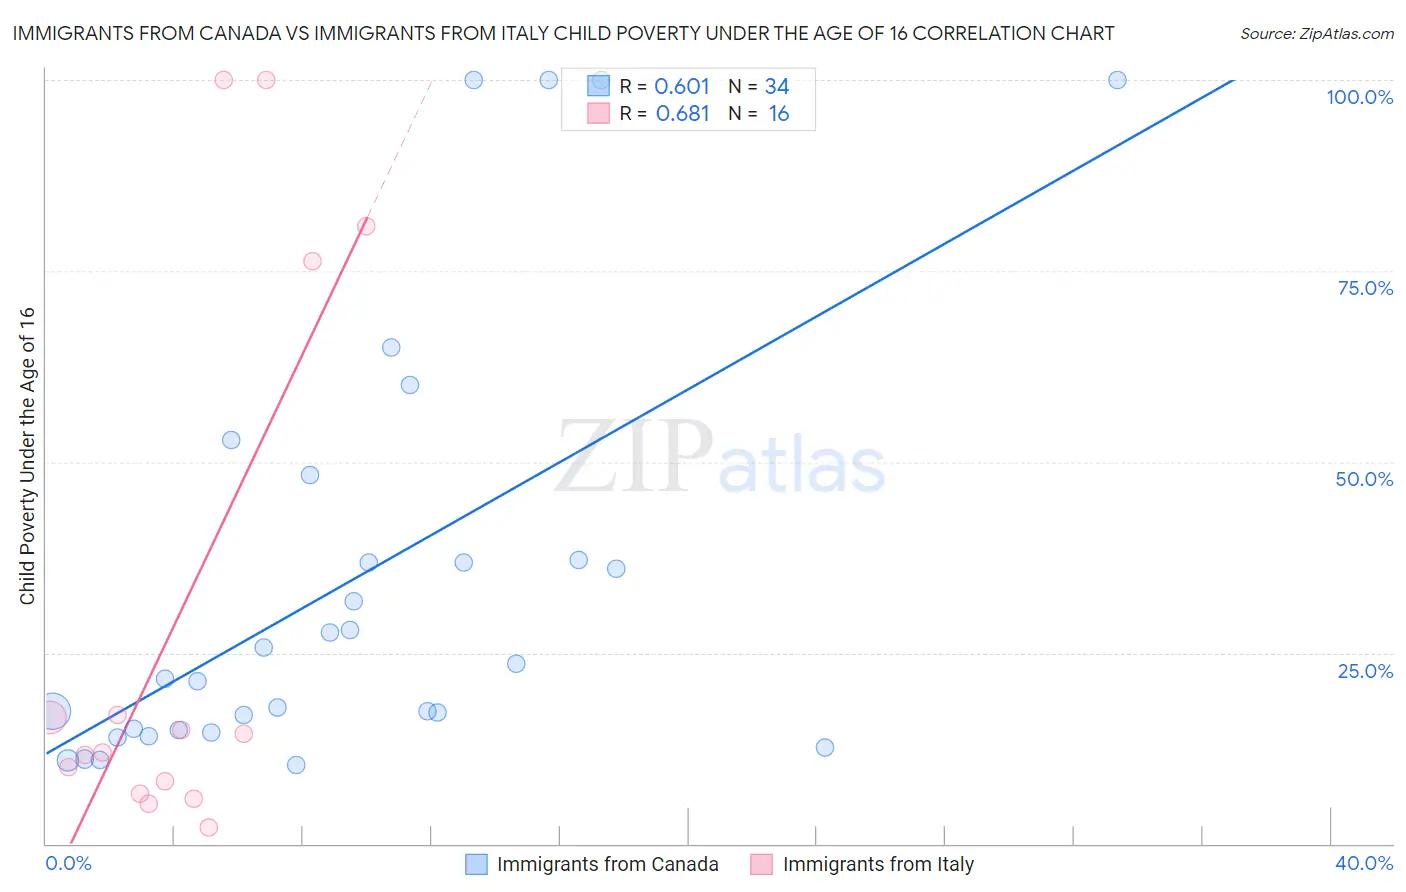 Immigrants from Canada vs Immigrants from Italy Child Poverty Under the Age of 16